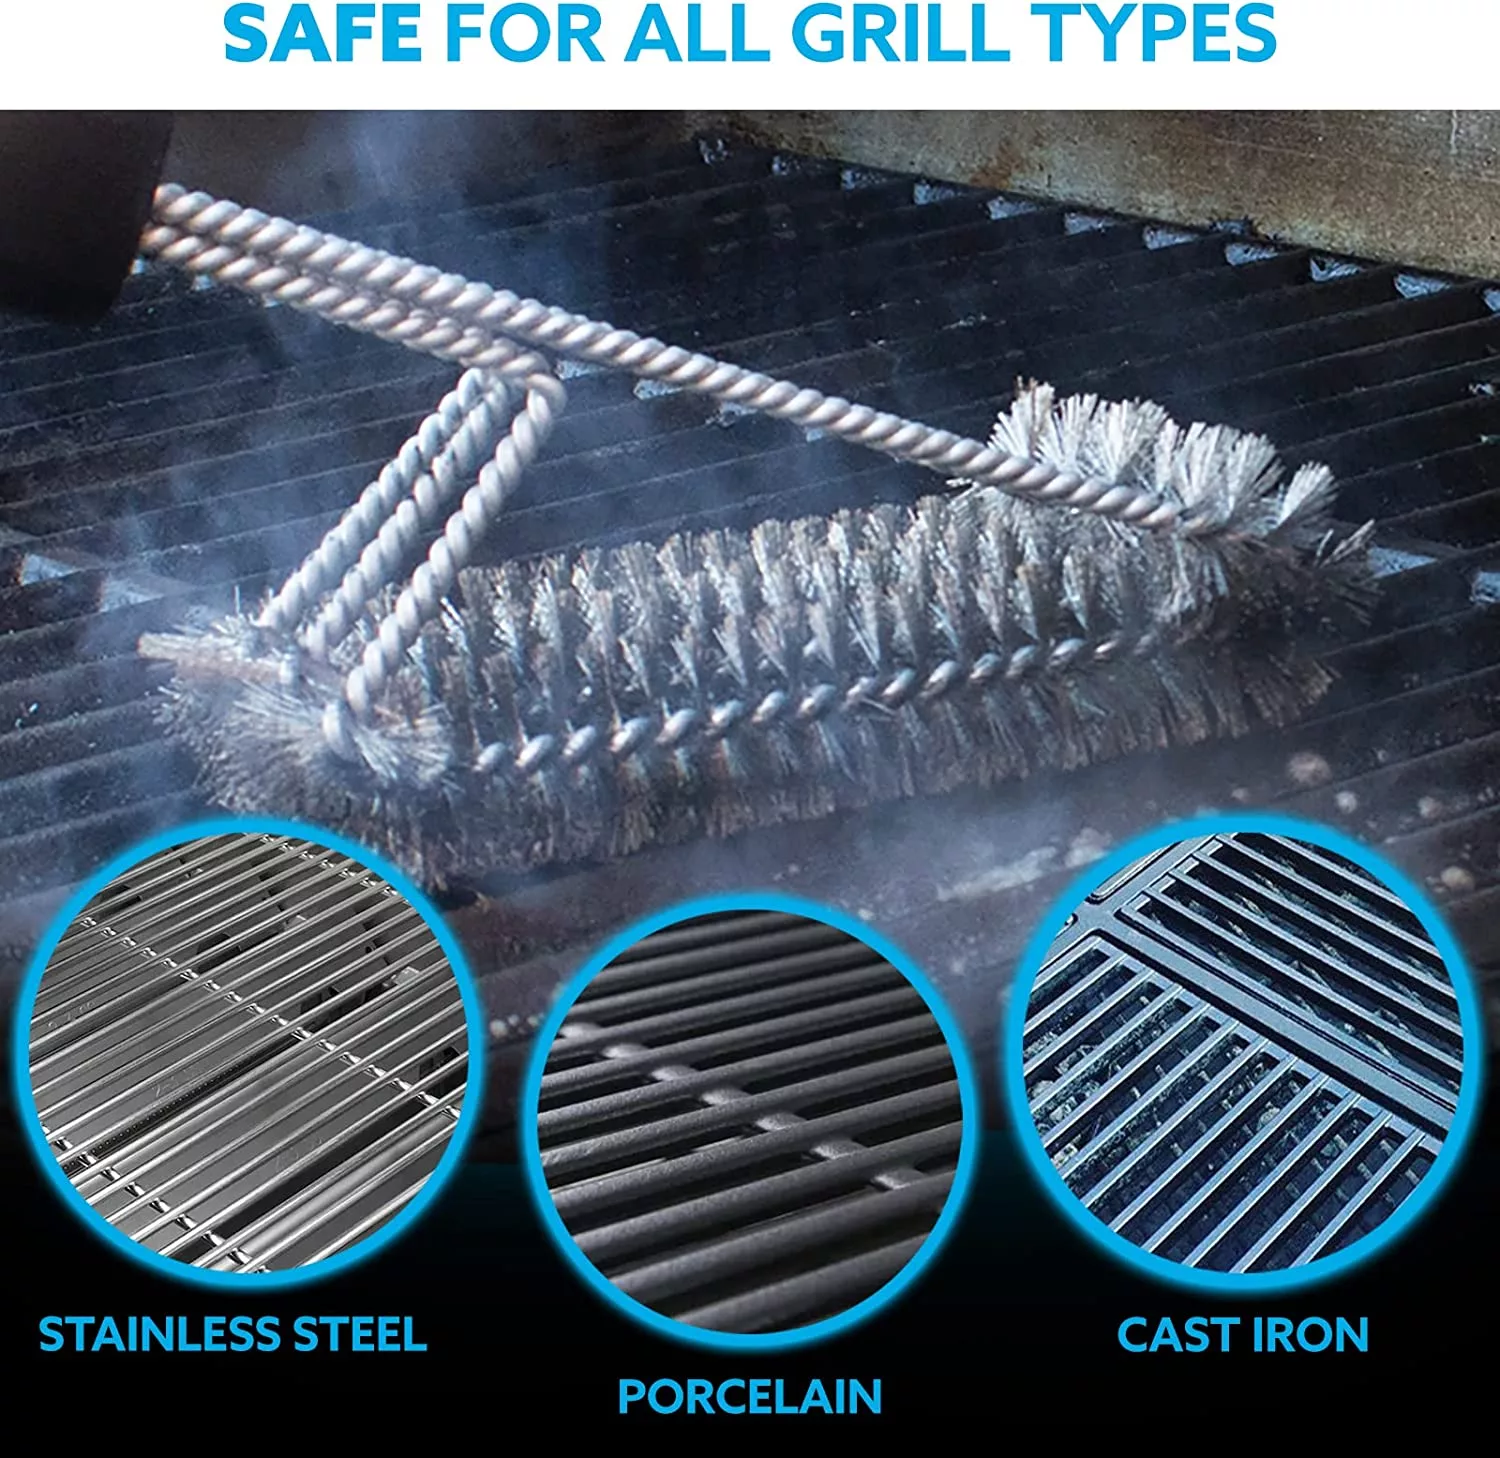 Kona 360 Clean Grill Brush is safe for all grill types